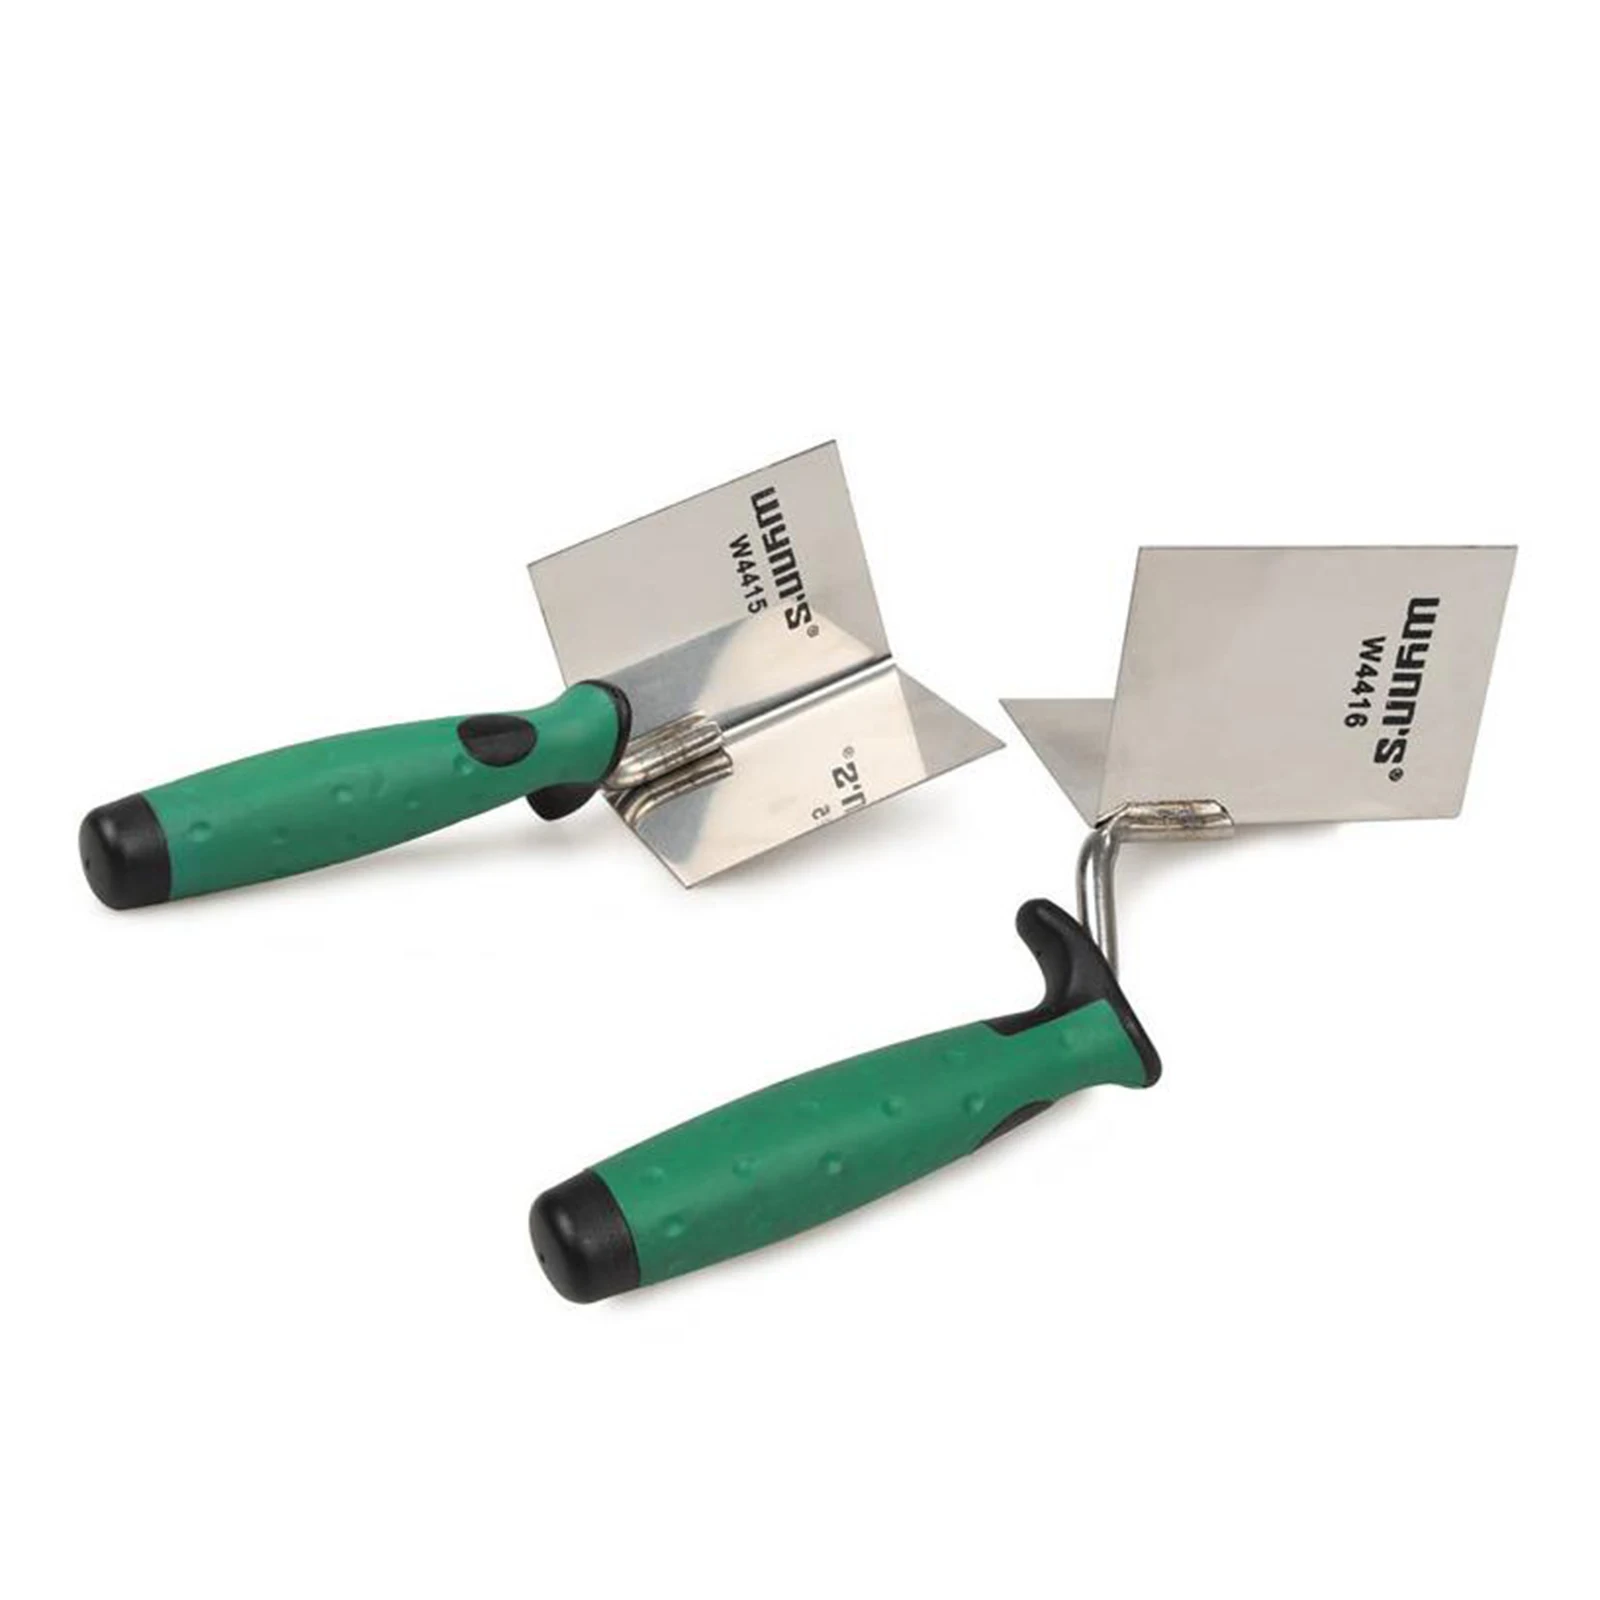 Inside/Outside Drywall Corner Tool Mudding Finish Tool Finishing Trowel with Soft Grip Hand Tool